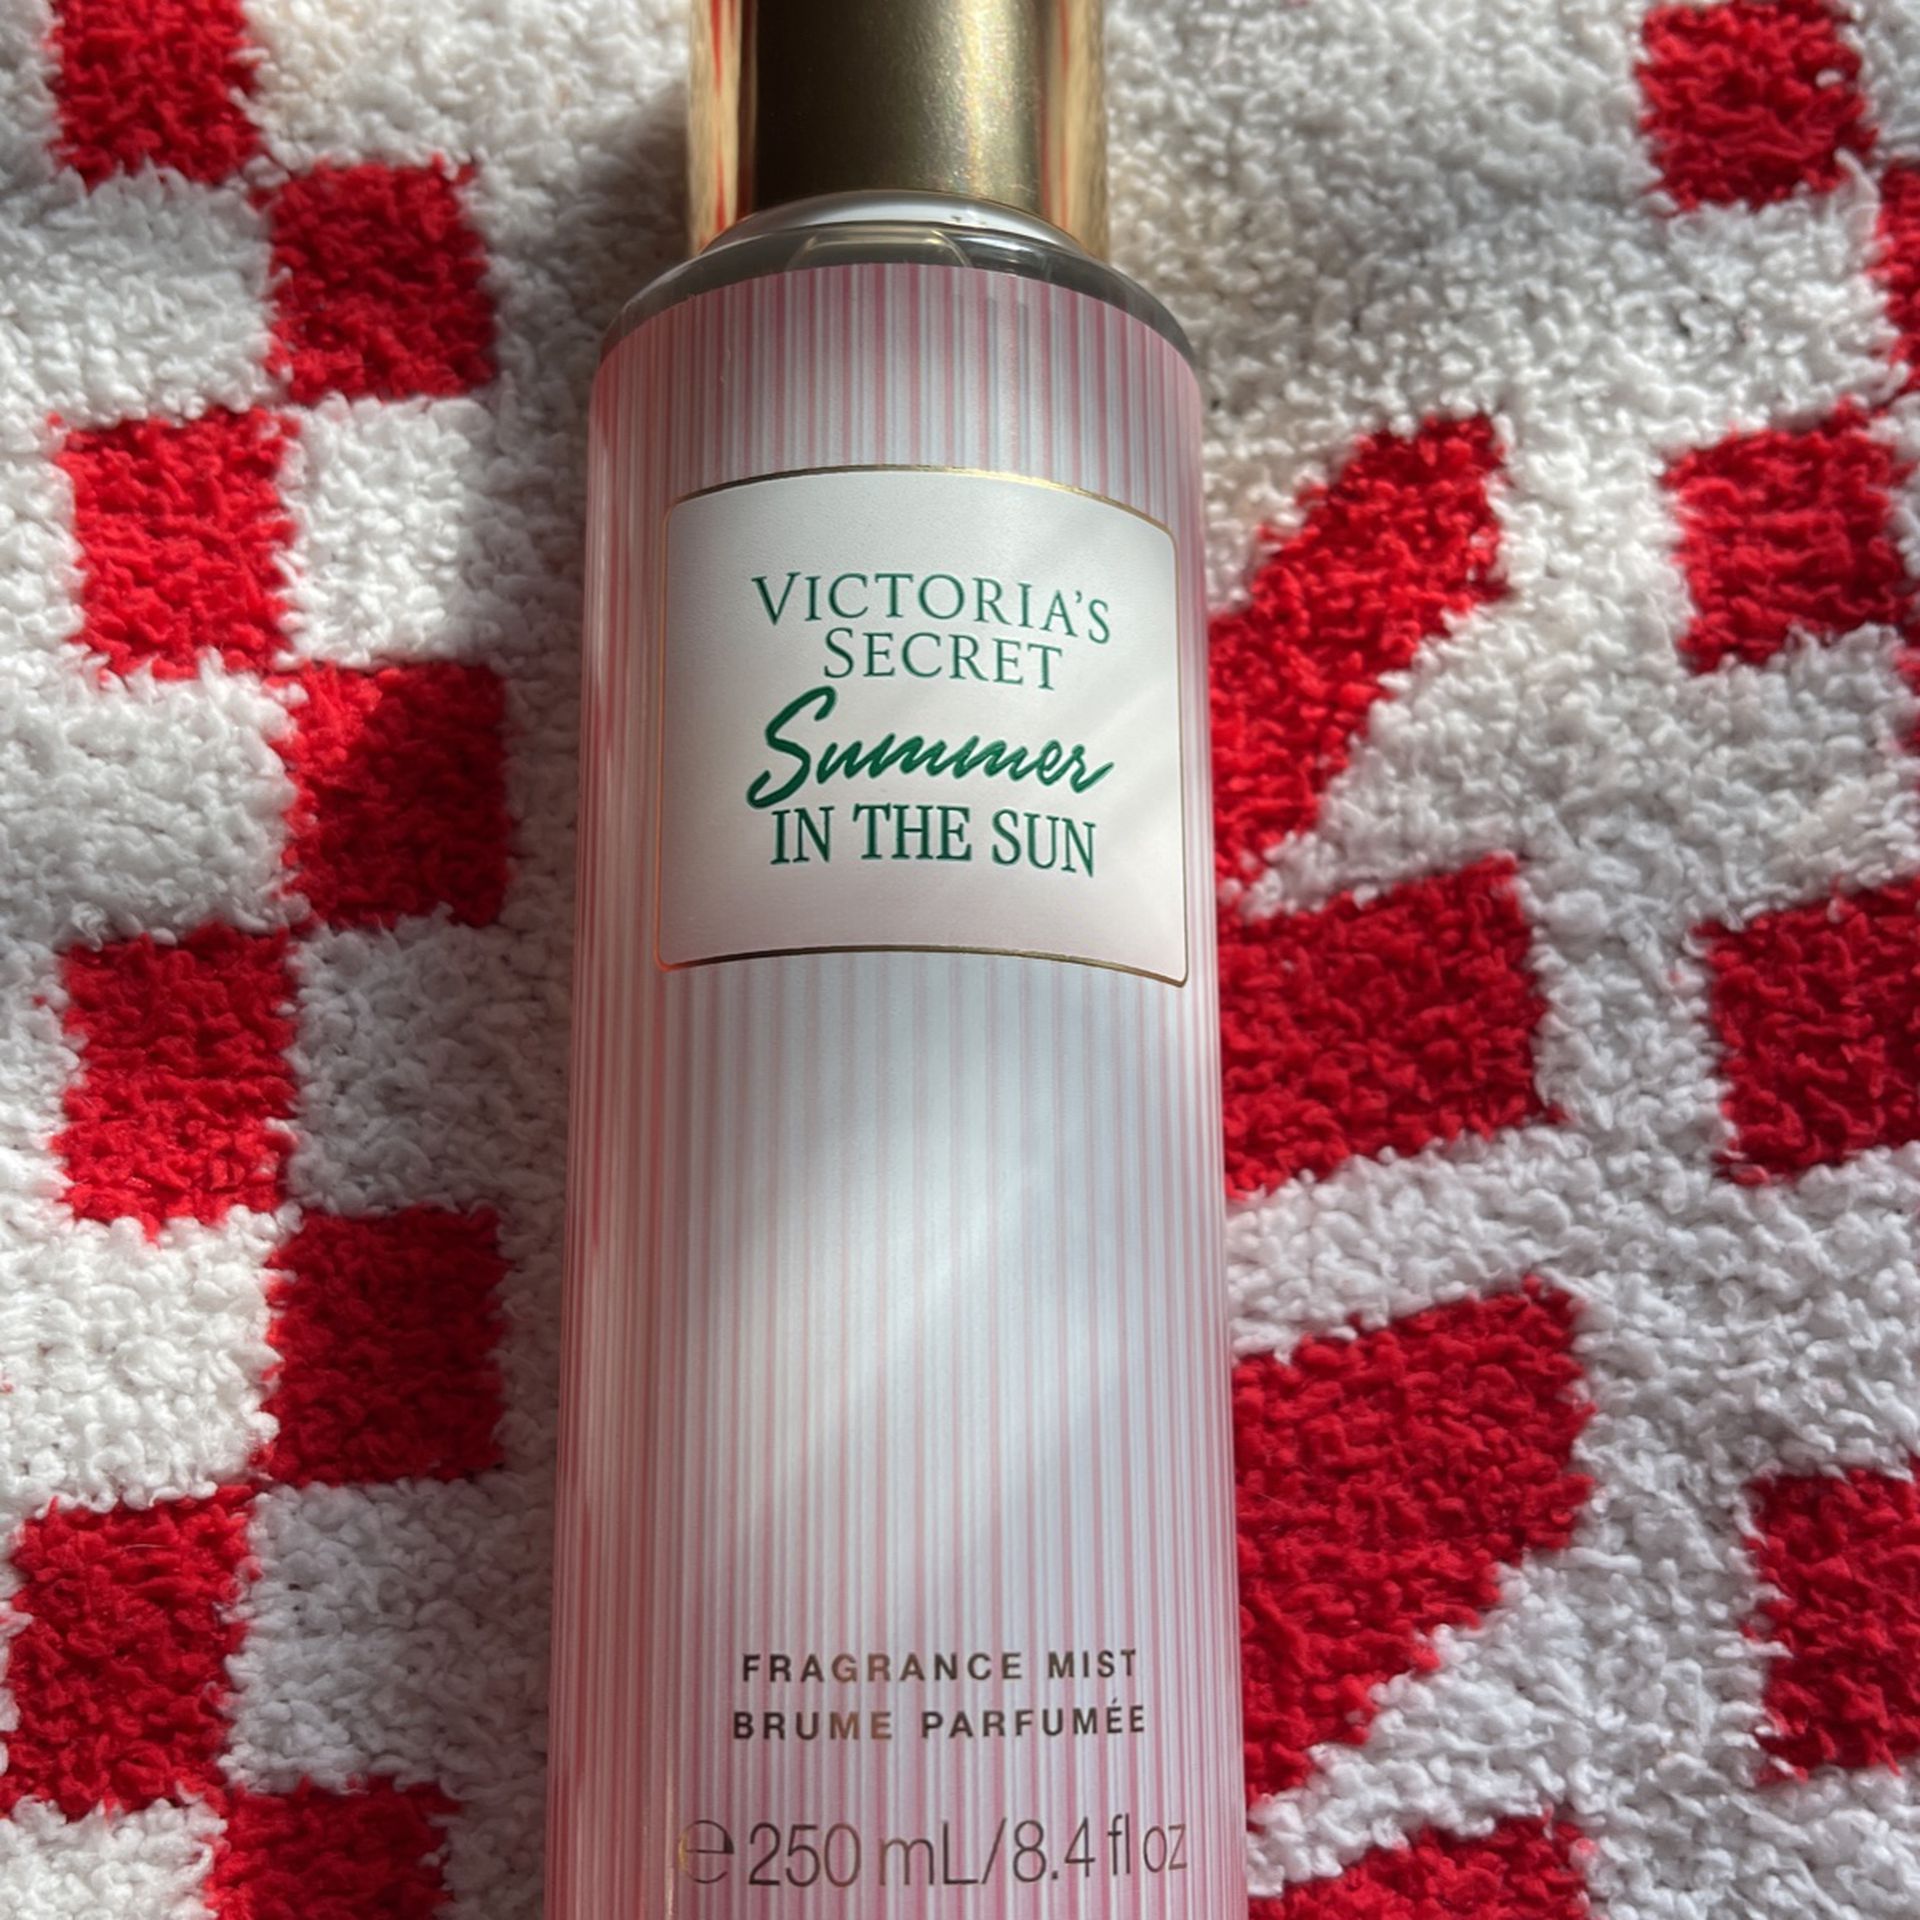 Victorias Secret Summer In The Sun Fragrance Mist Perfume And Lotion